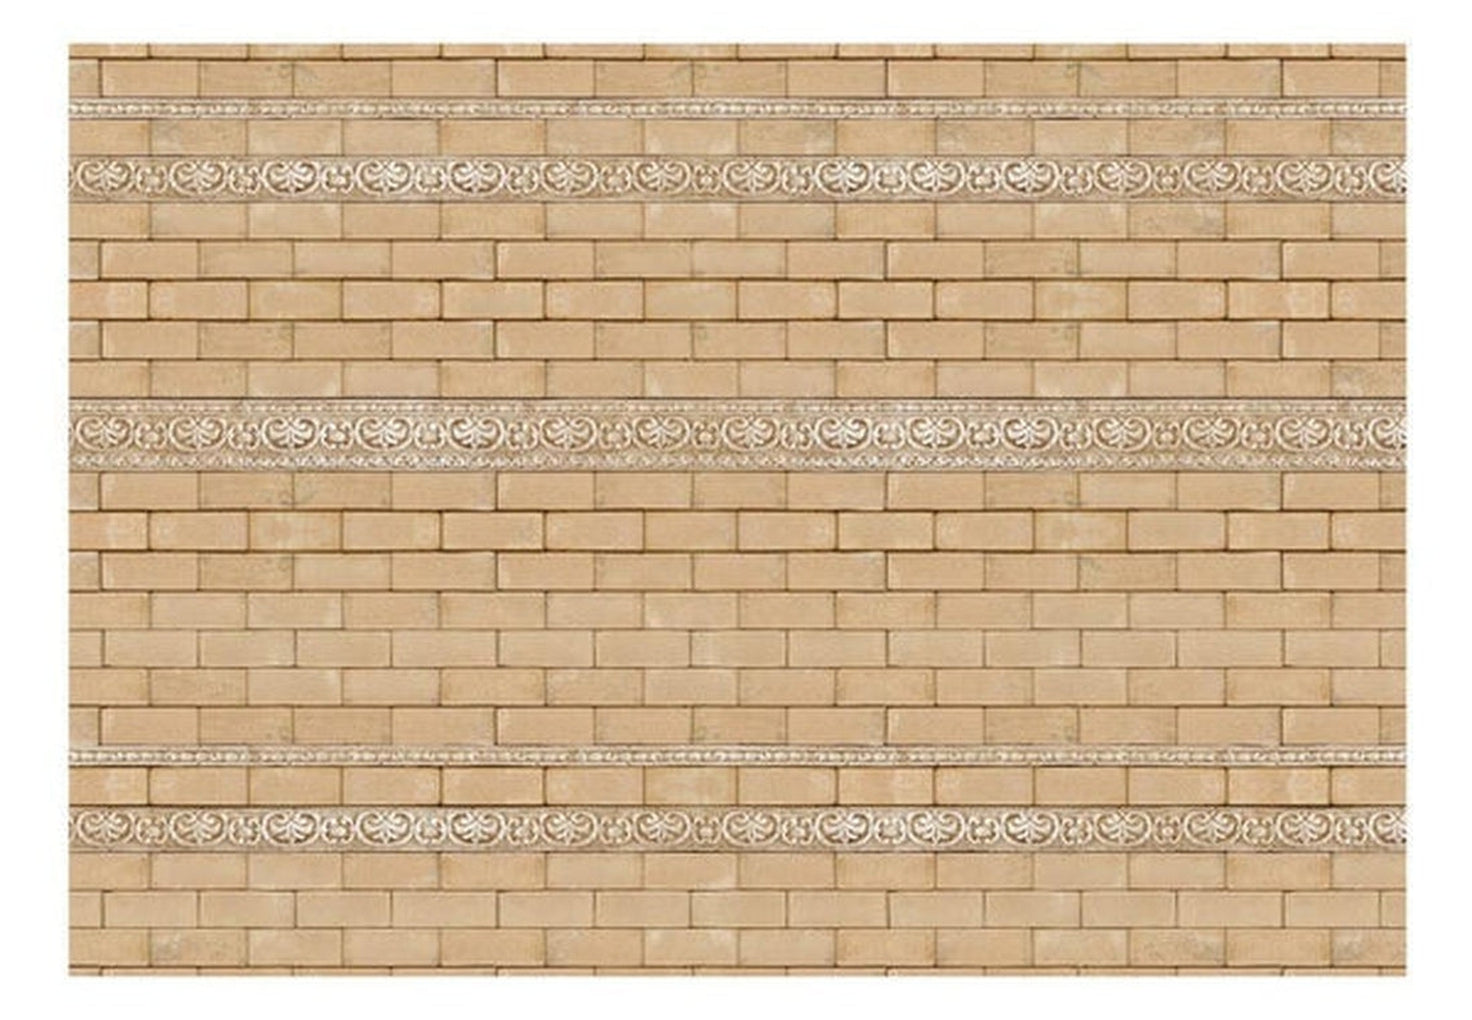 Wall mural - Brick with ornaments-TipTopHomeDecor